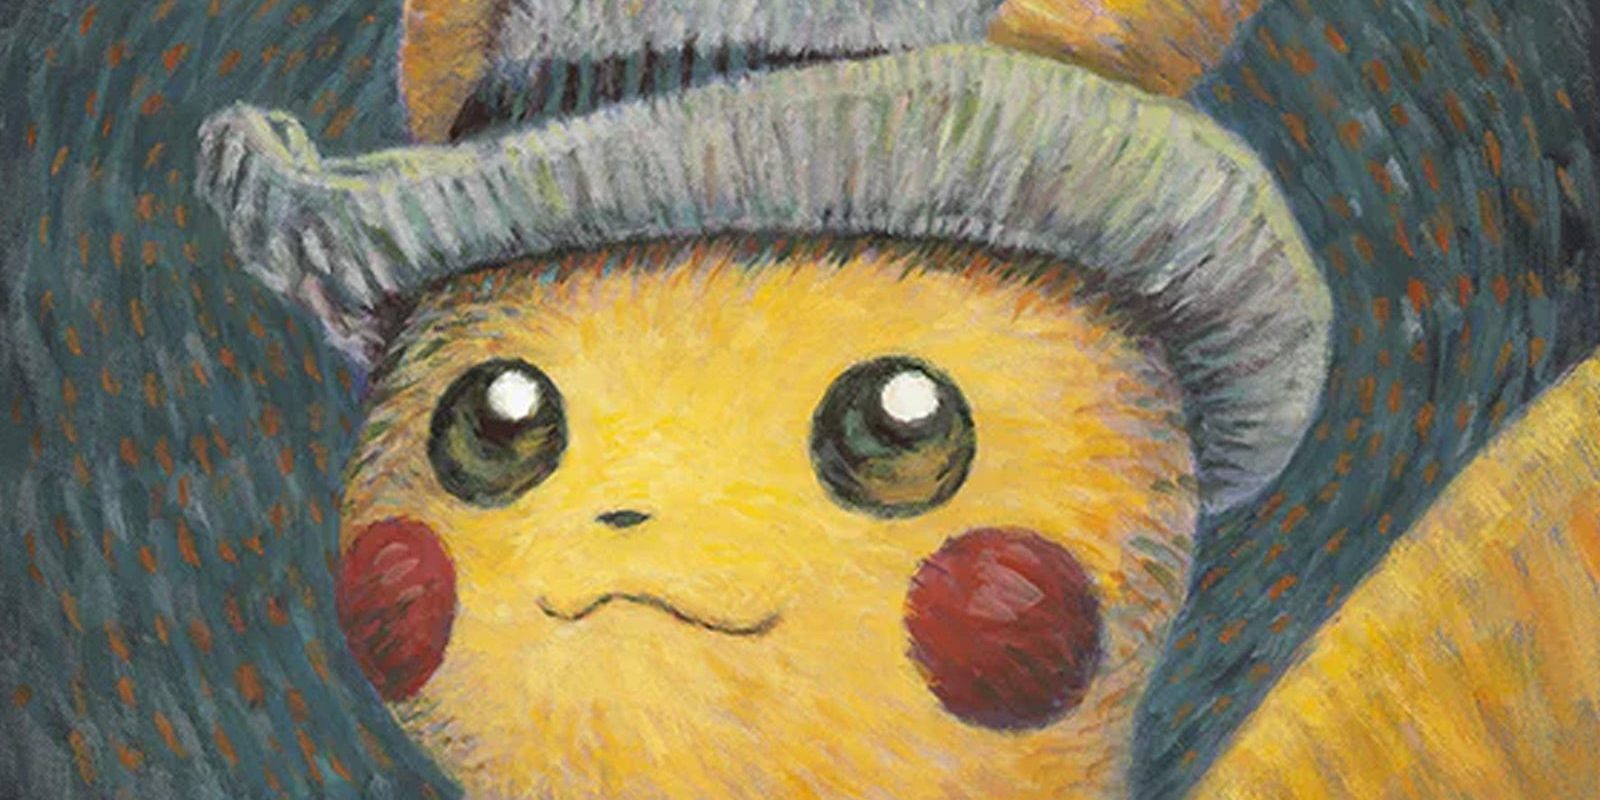 The Pokémon Company apologises for the "disappointment" caused by scalpers buying up all of its Van Gogh items